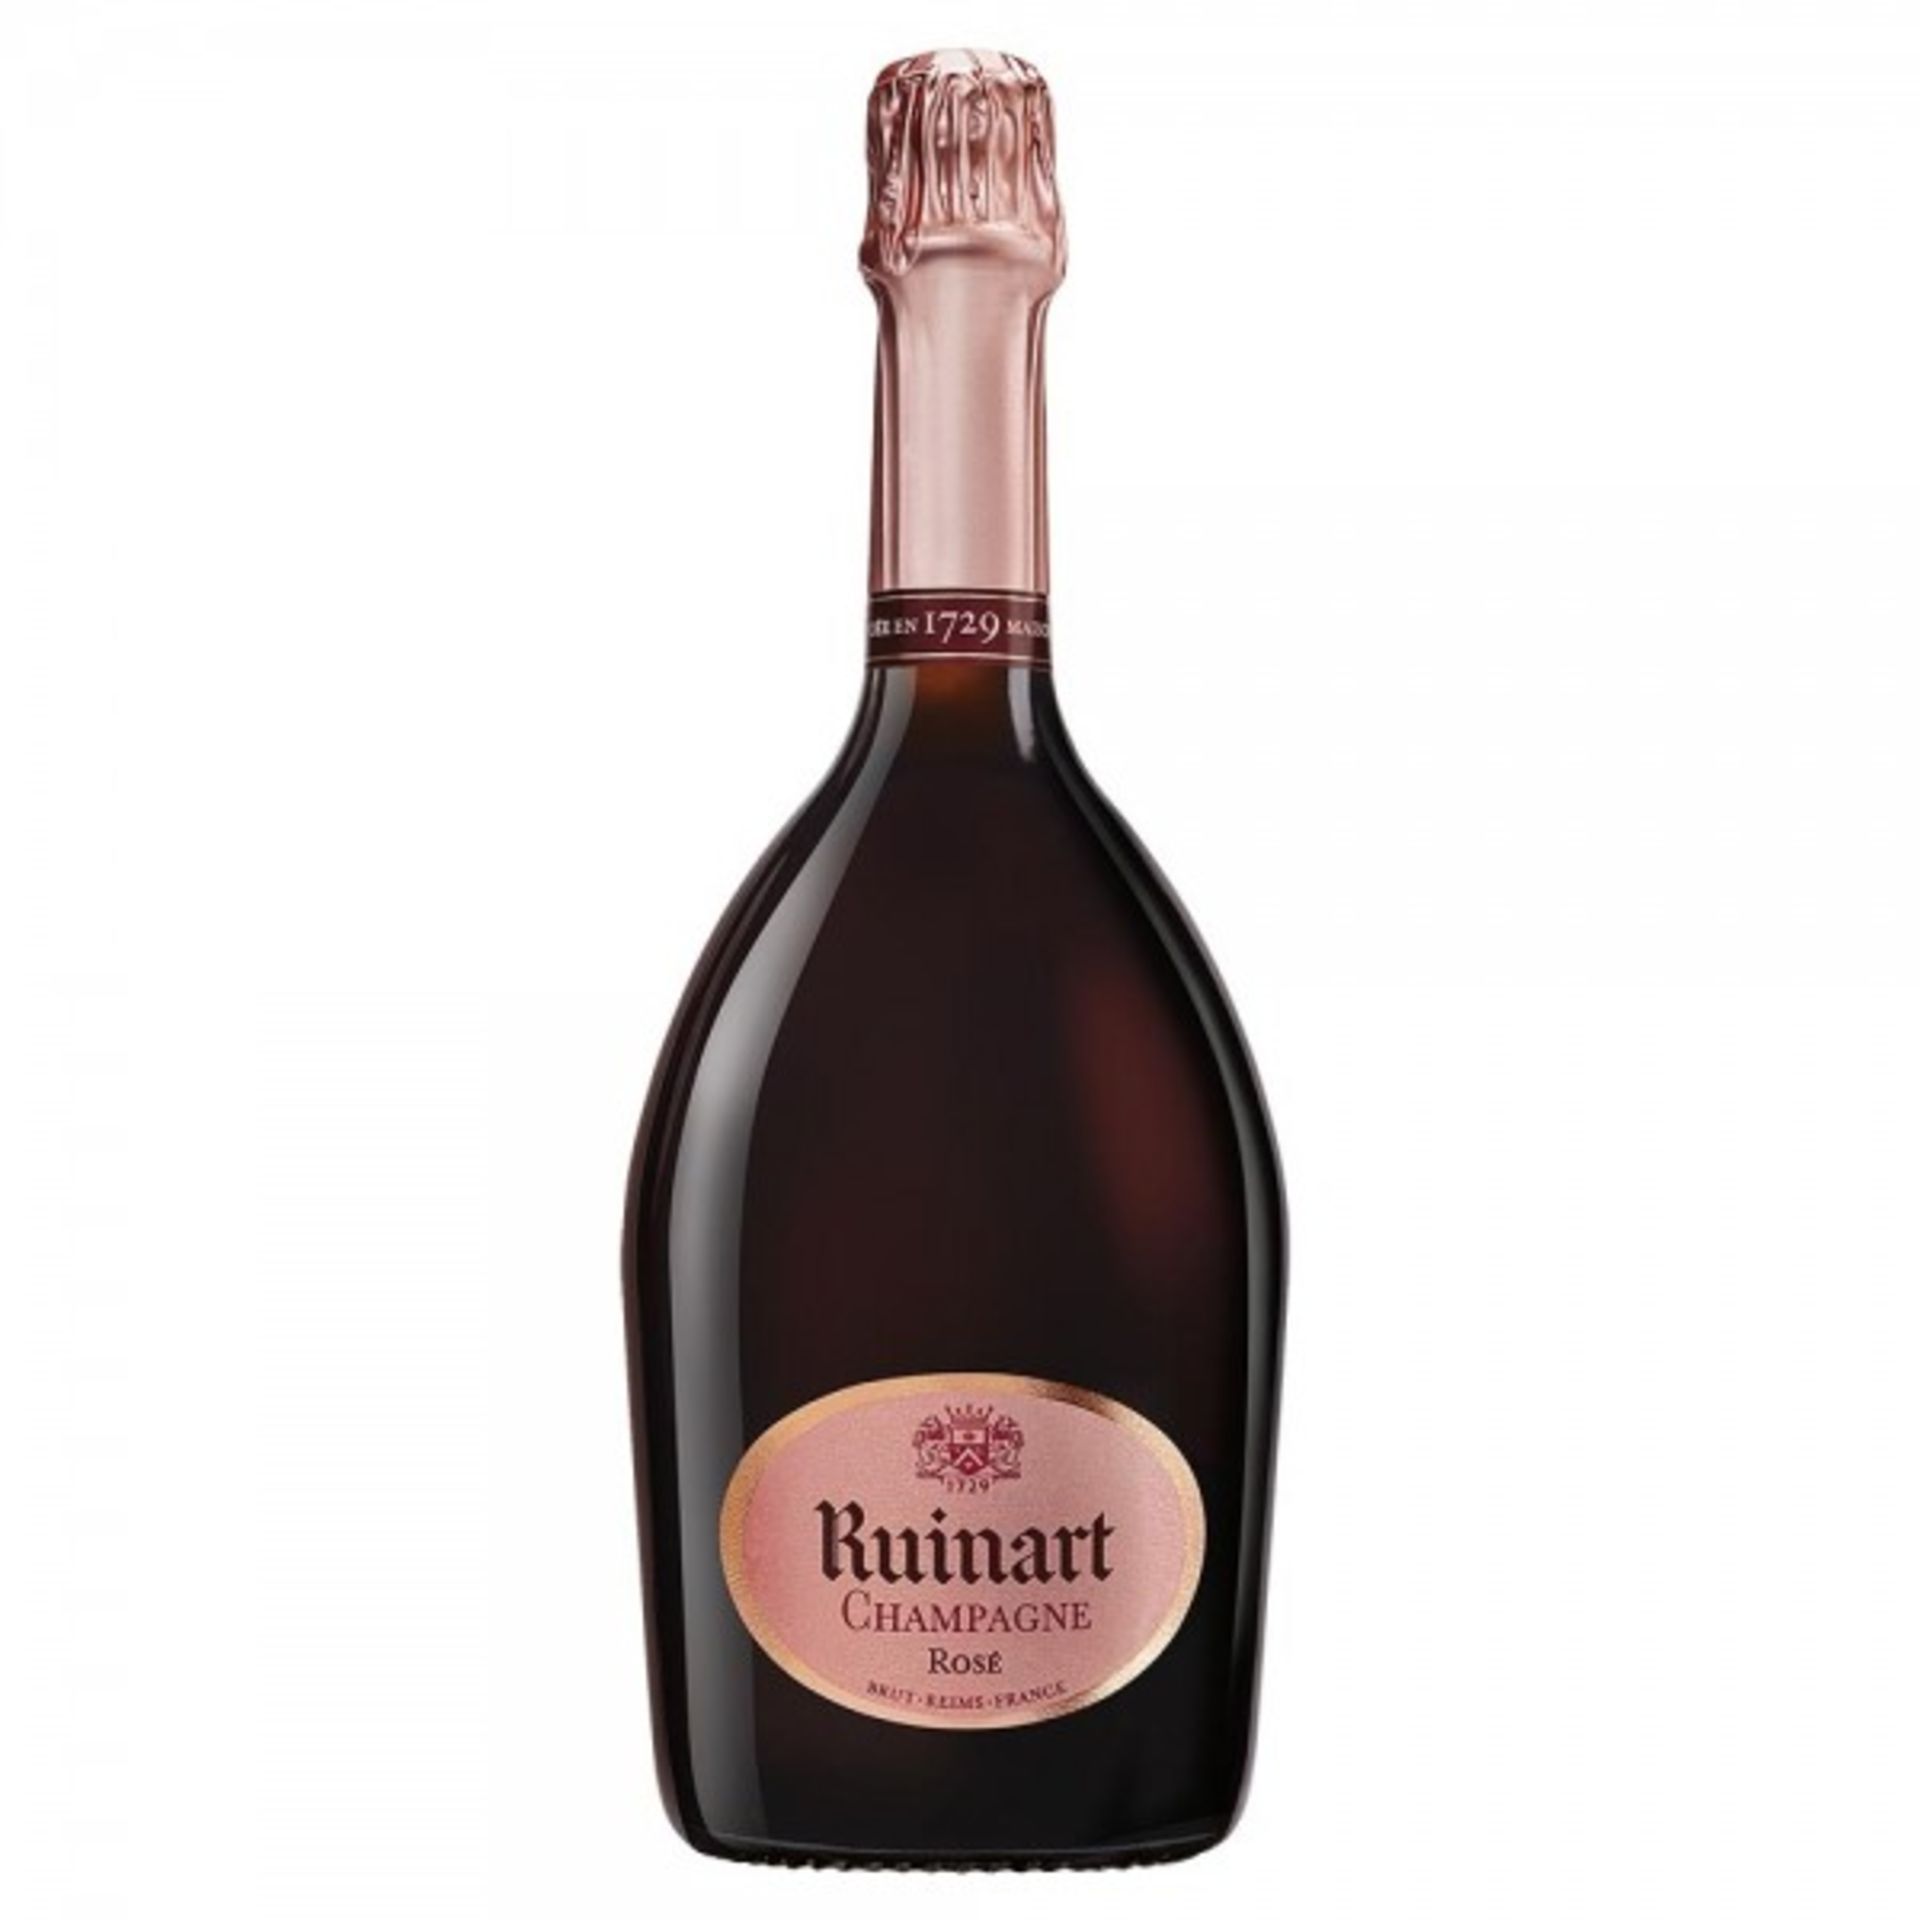 Ruinart 'R De Ruinart' Brut Rose, Champagne 750ml ( Bid Is For 1x Bottle Option To Purchase More)